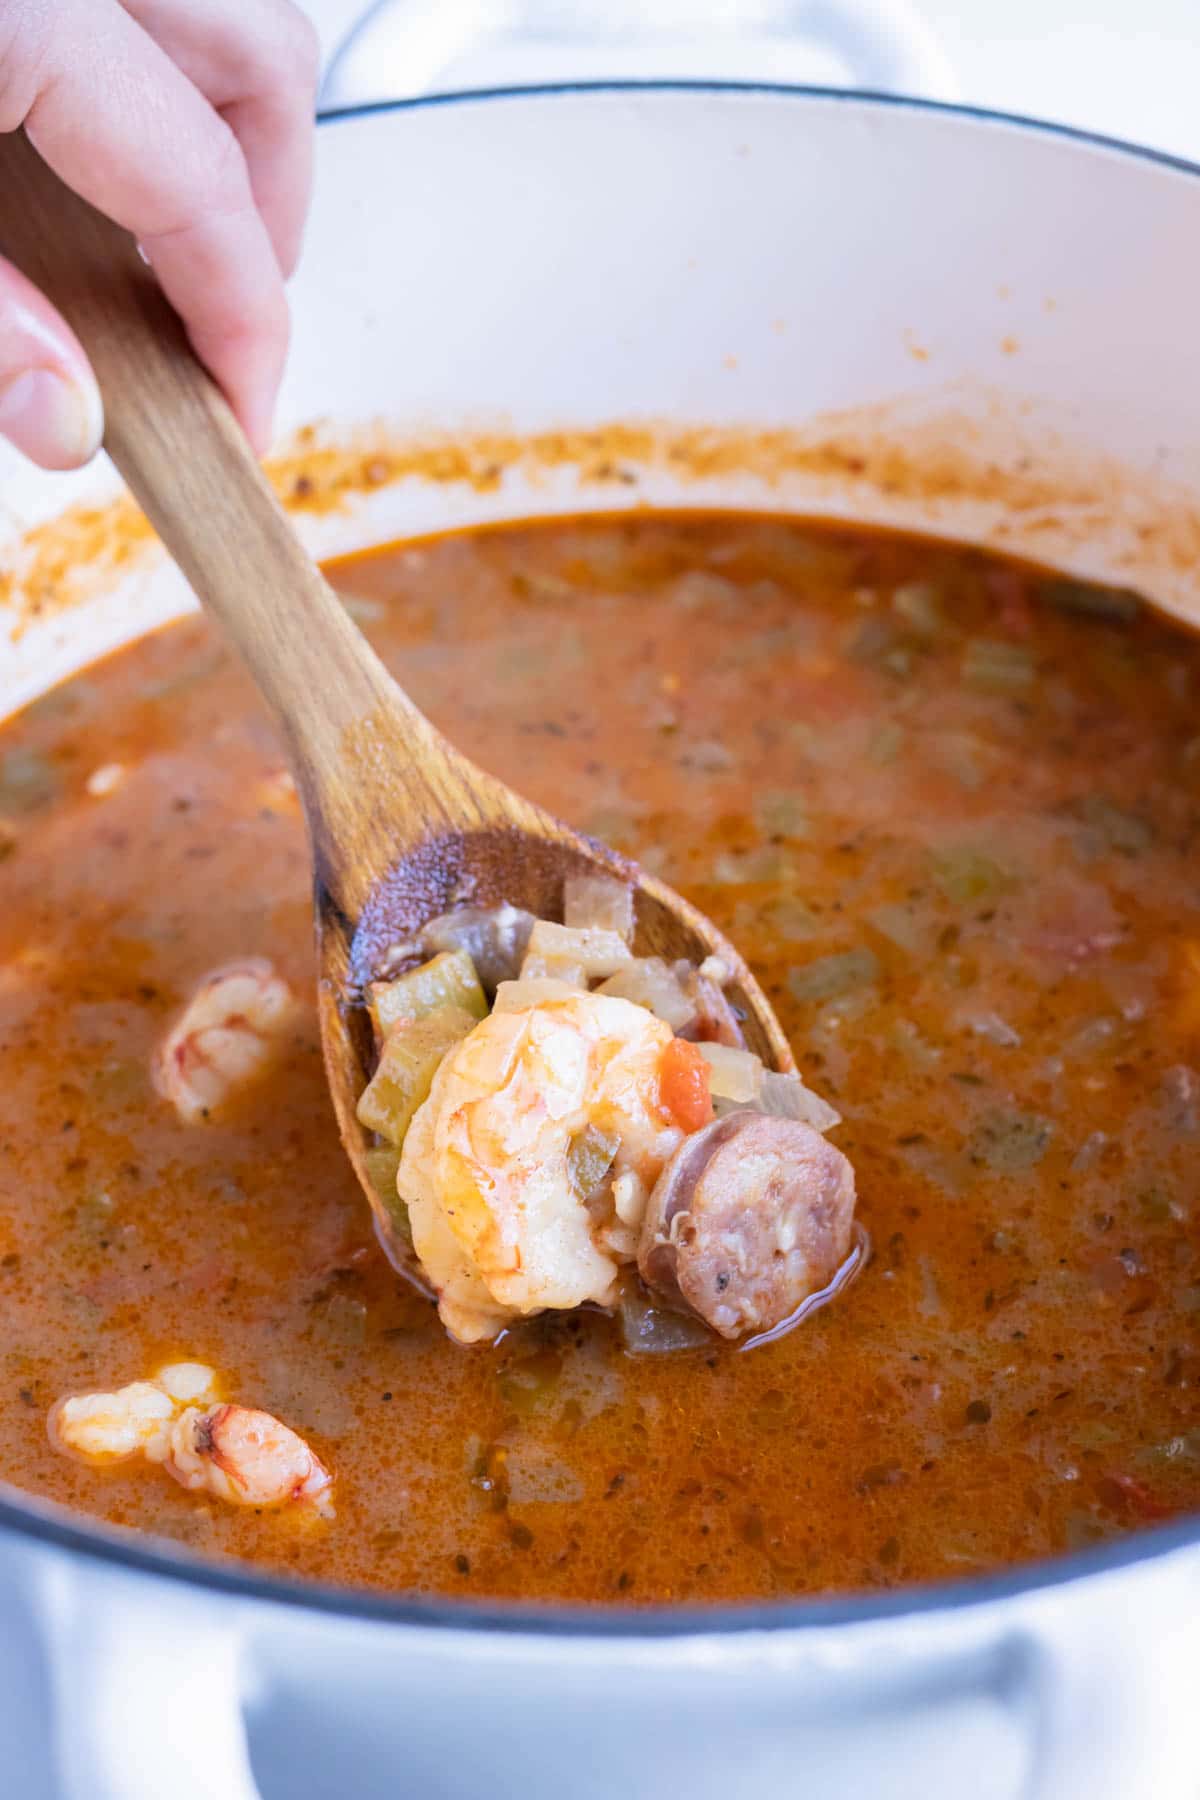 Shrimp and sausage gumbo is served from a pot with a wooden spoon.